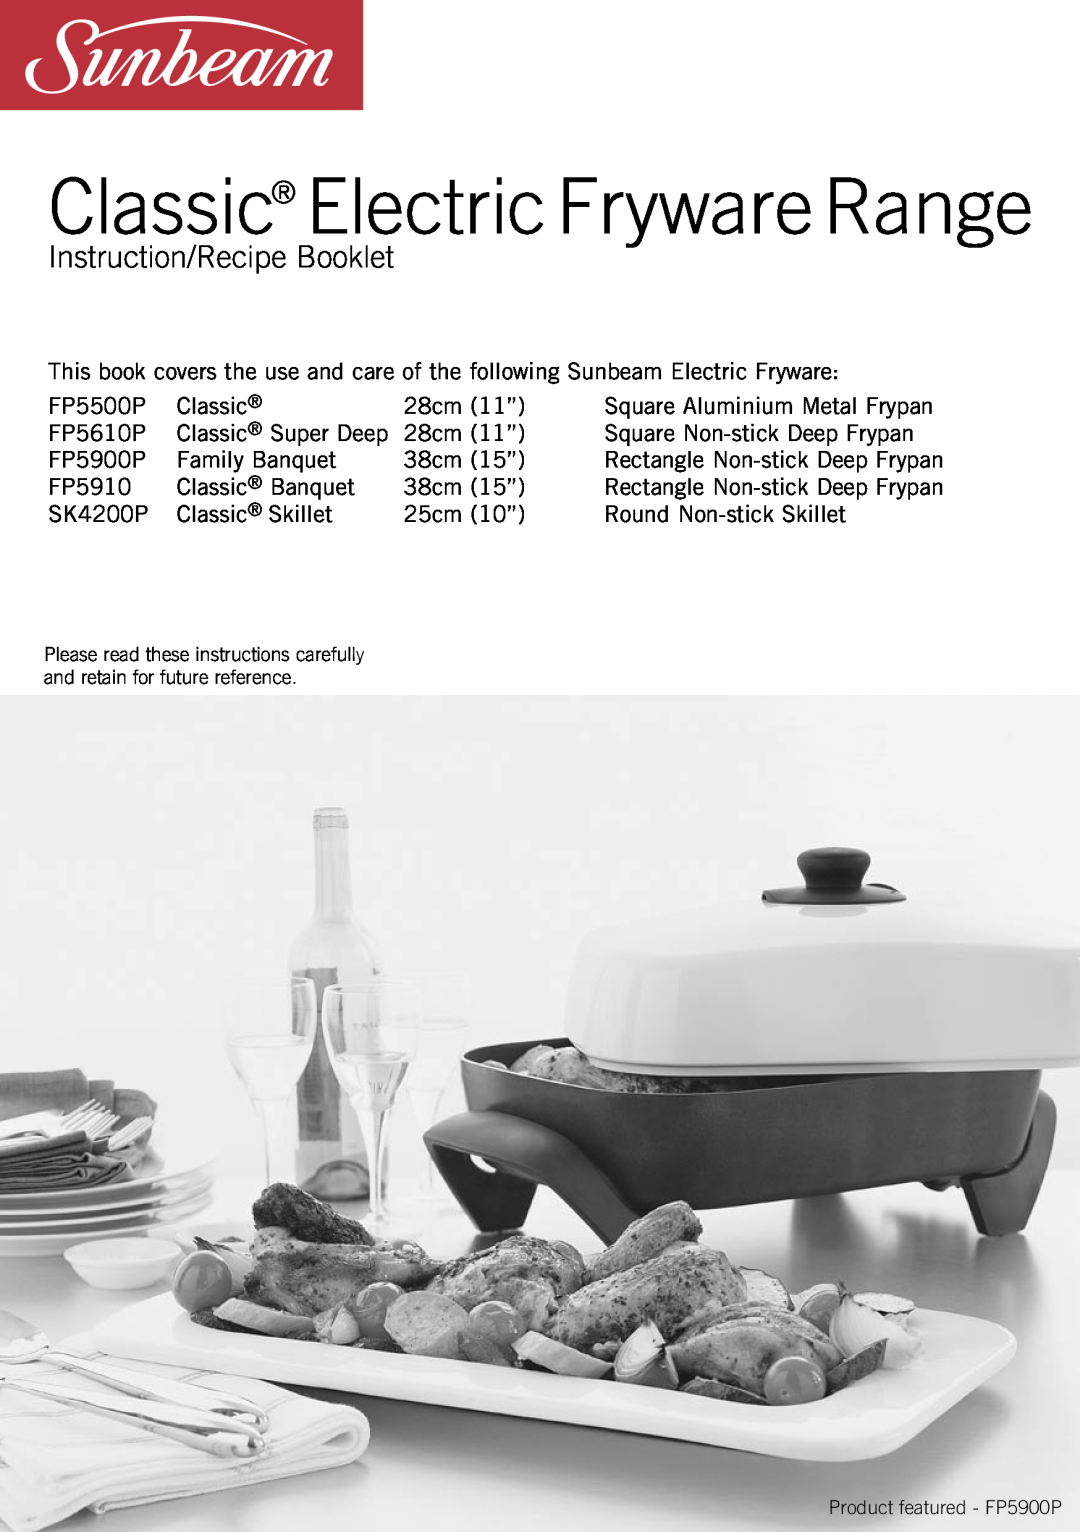 Sunbeam FP5500P manual Instruction/Recipe Booklet, Waiting on Front, Cover from Energi, Classic Electric Fryware Range 